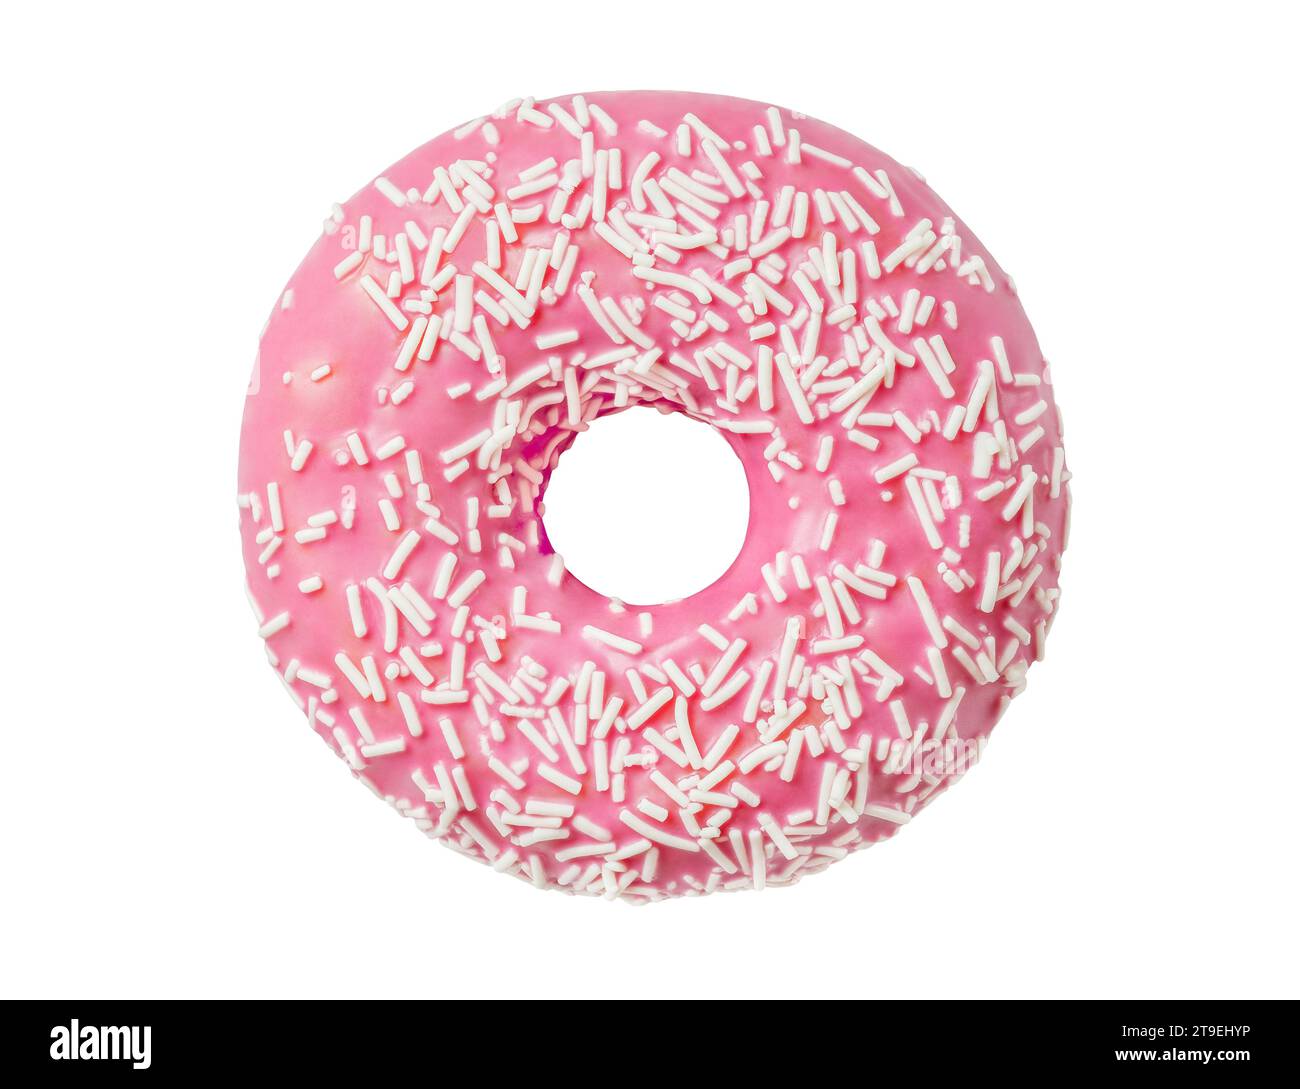 Donut with pink glaze, isolated on white background with clipping path, element of packaging design. Full depth of field. Stock Photo